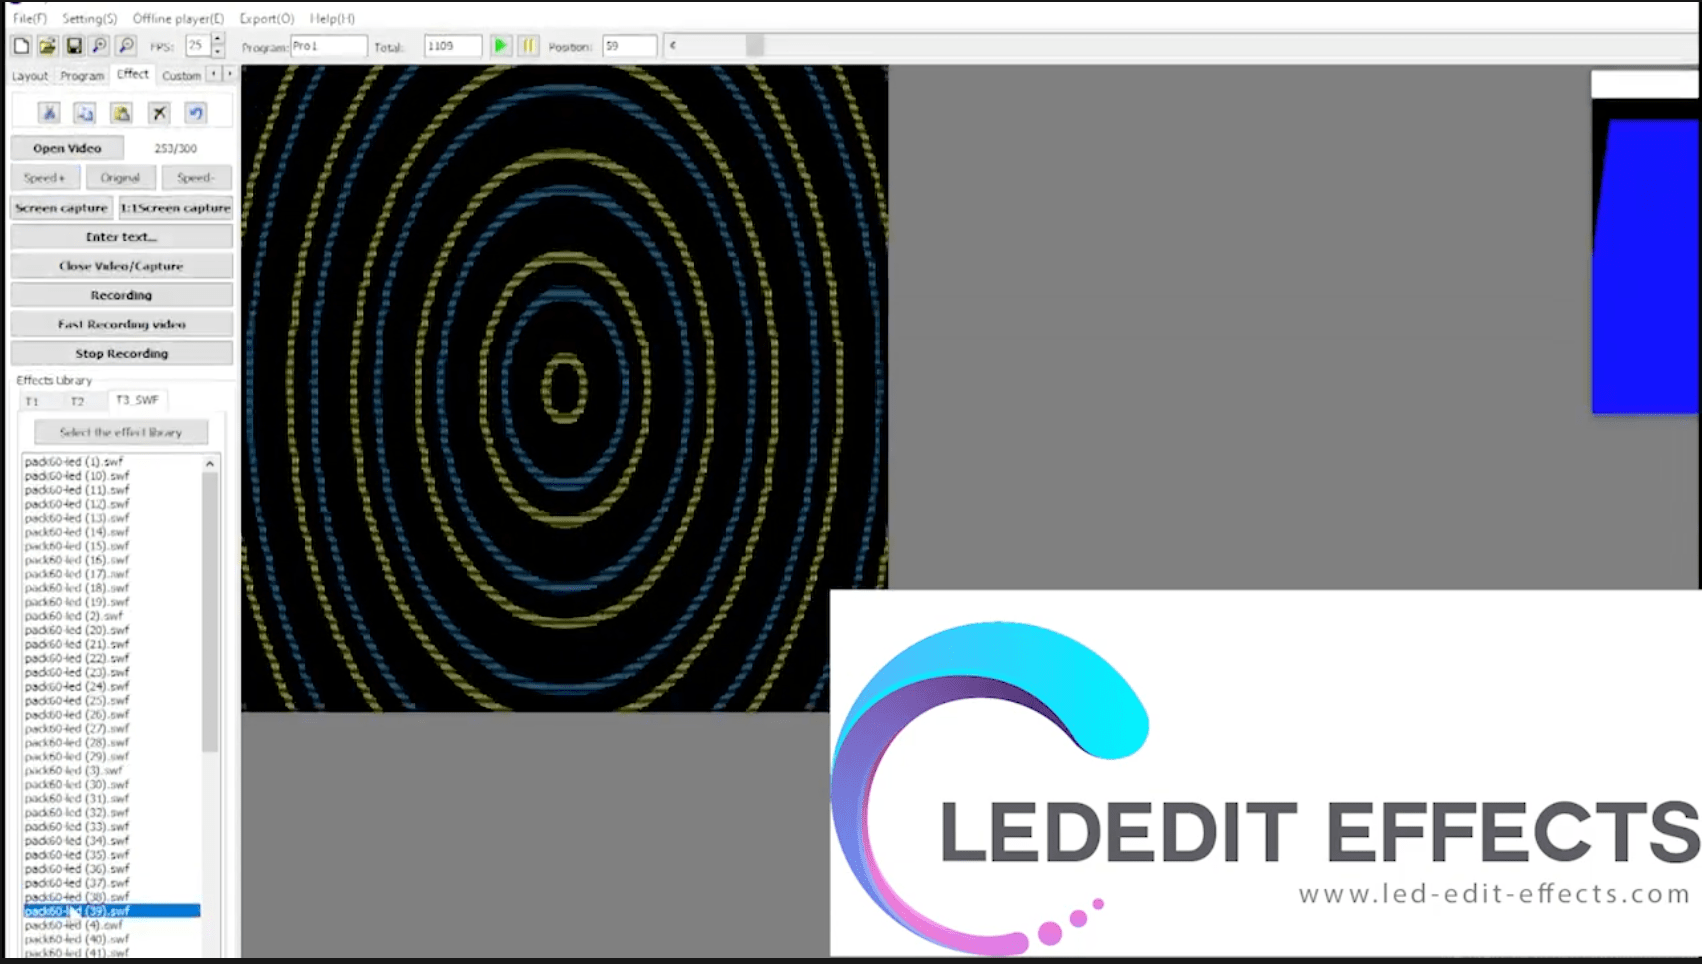 Download Free Effects &amp; Animations for LedEdit Software.
Free SWF animations for pixel led, great for LED Edit and other programs or controllers that accept video input.

    



    Hello LED Friends!

    We just created a page dedicated for free pixel led animations, so you can test your LED controller!

    Pack includes different animations. 

    Check our page with free led edit effects &amp; animations link down below.

    
        
    

FREE Led Edit Effects: https://led-edit-effects.com/free-swf-lededit-effects

    


    


    
